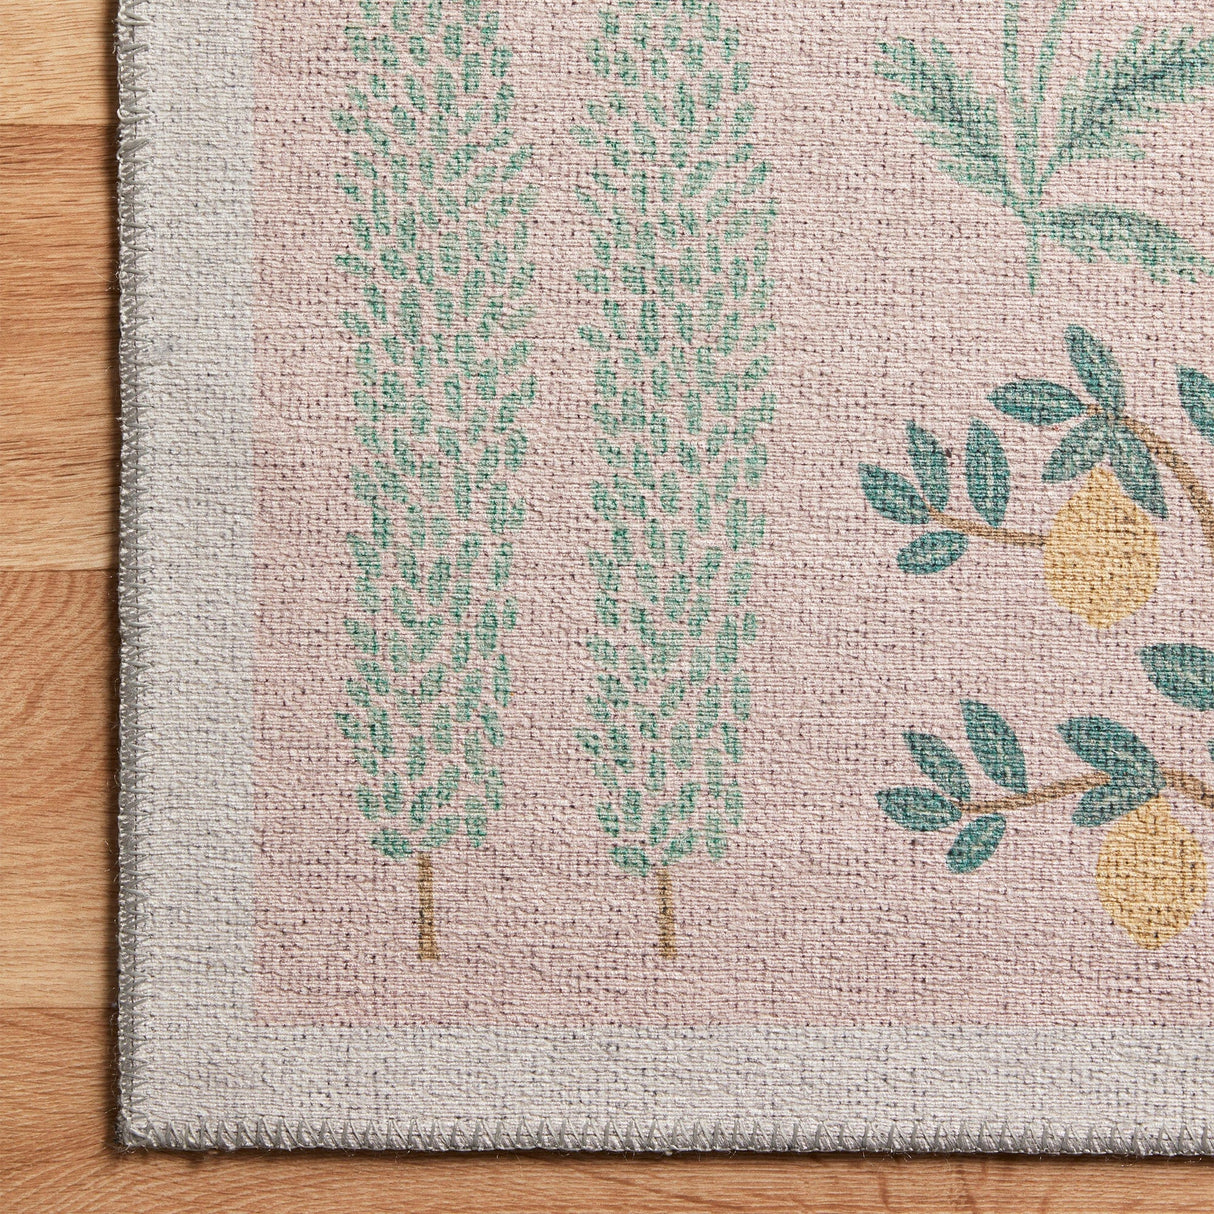 Loloi Rifle Paper Co. Menagerie Les Fauves Rug Rugs